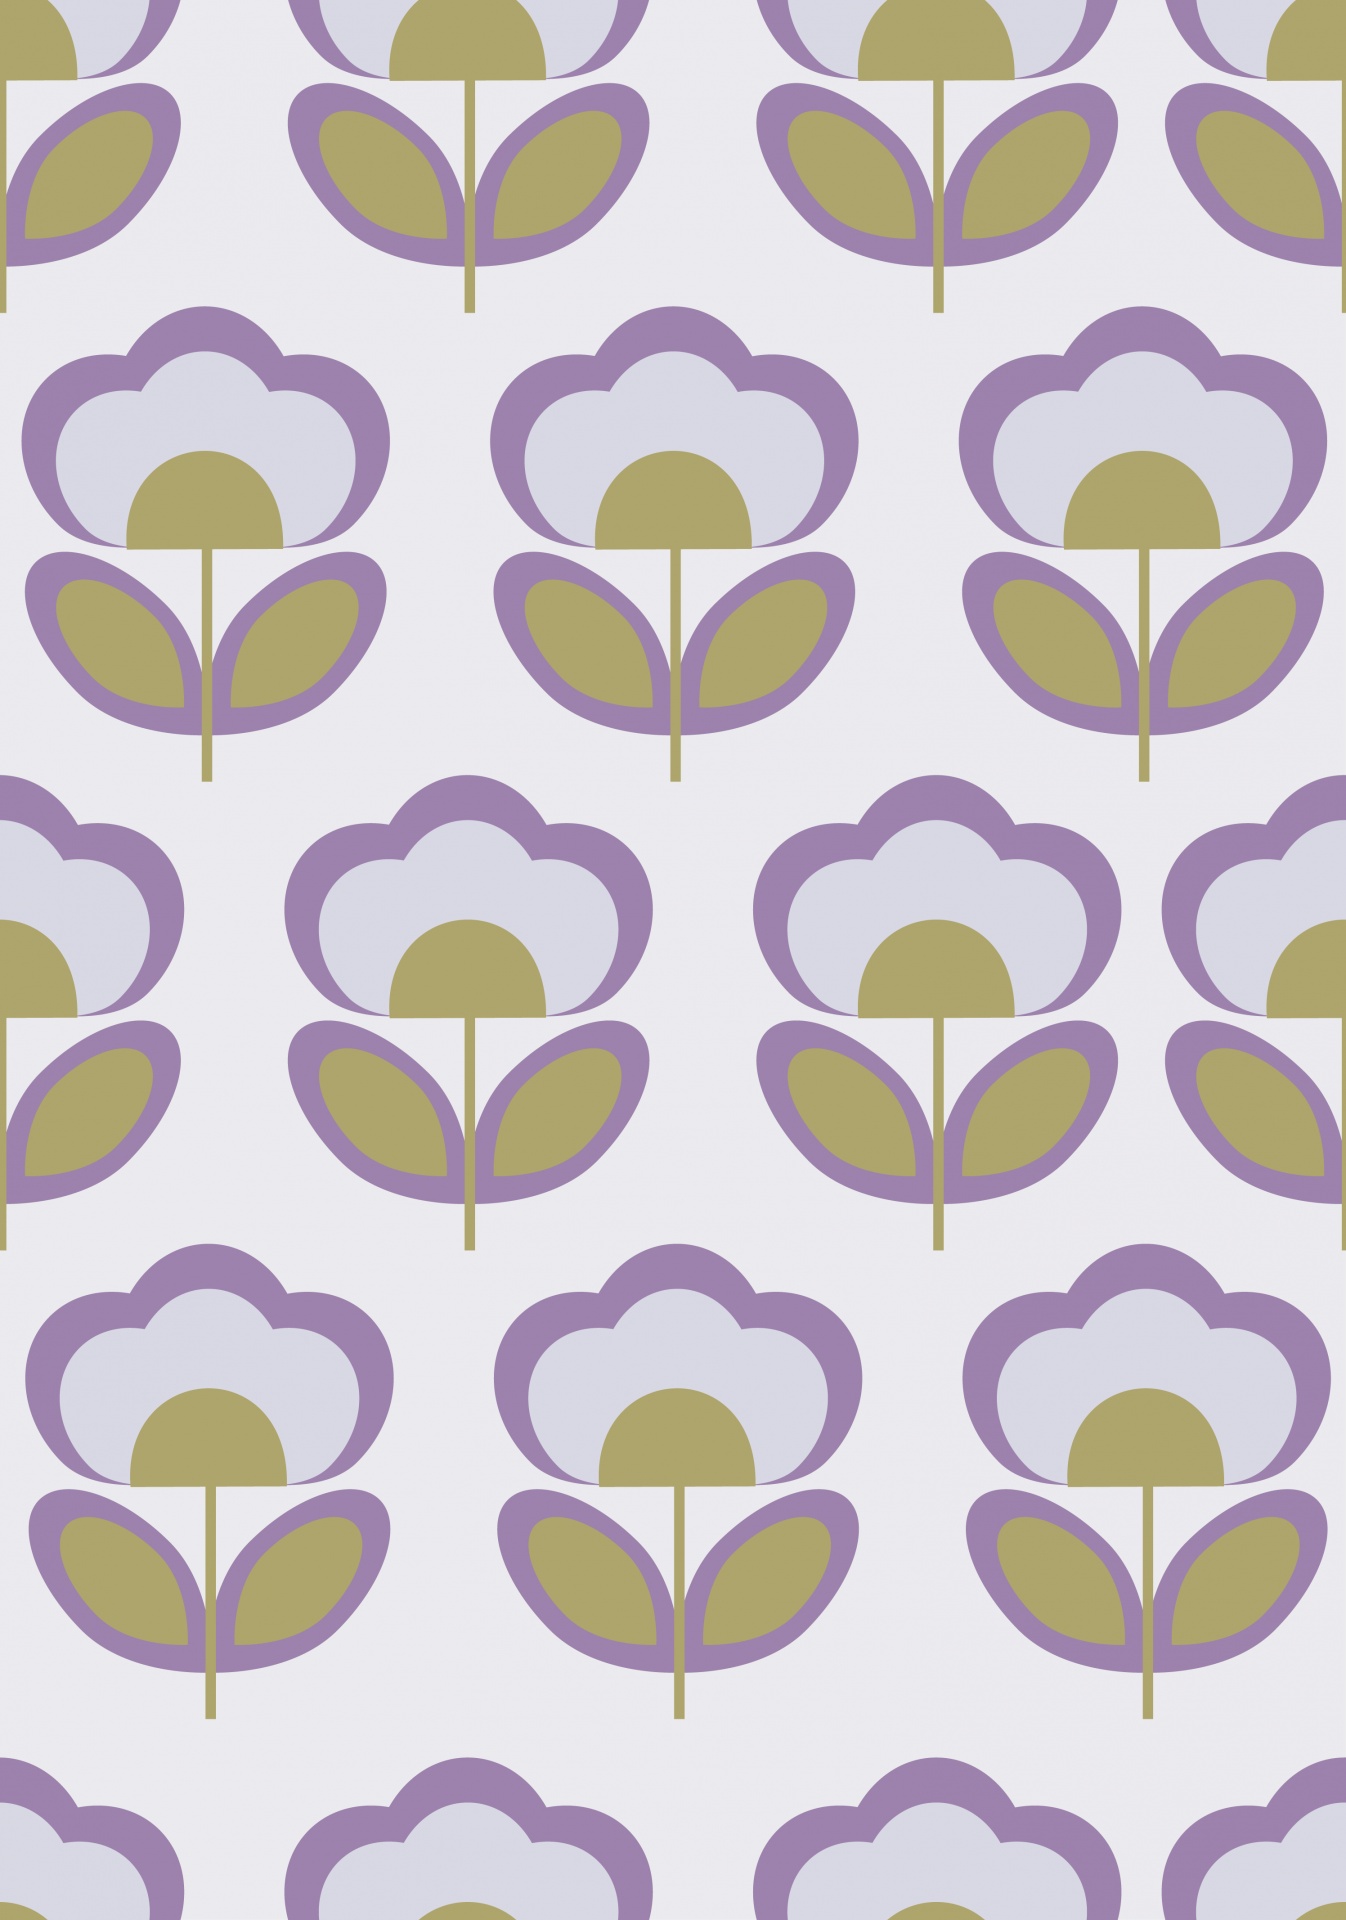 Cute retro floral flowers in 60s or 70s design seamless pattern wallpaper background